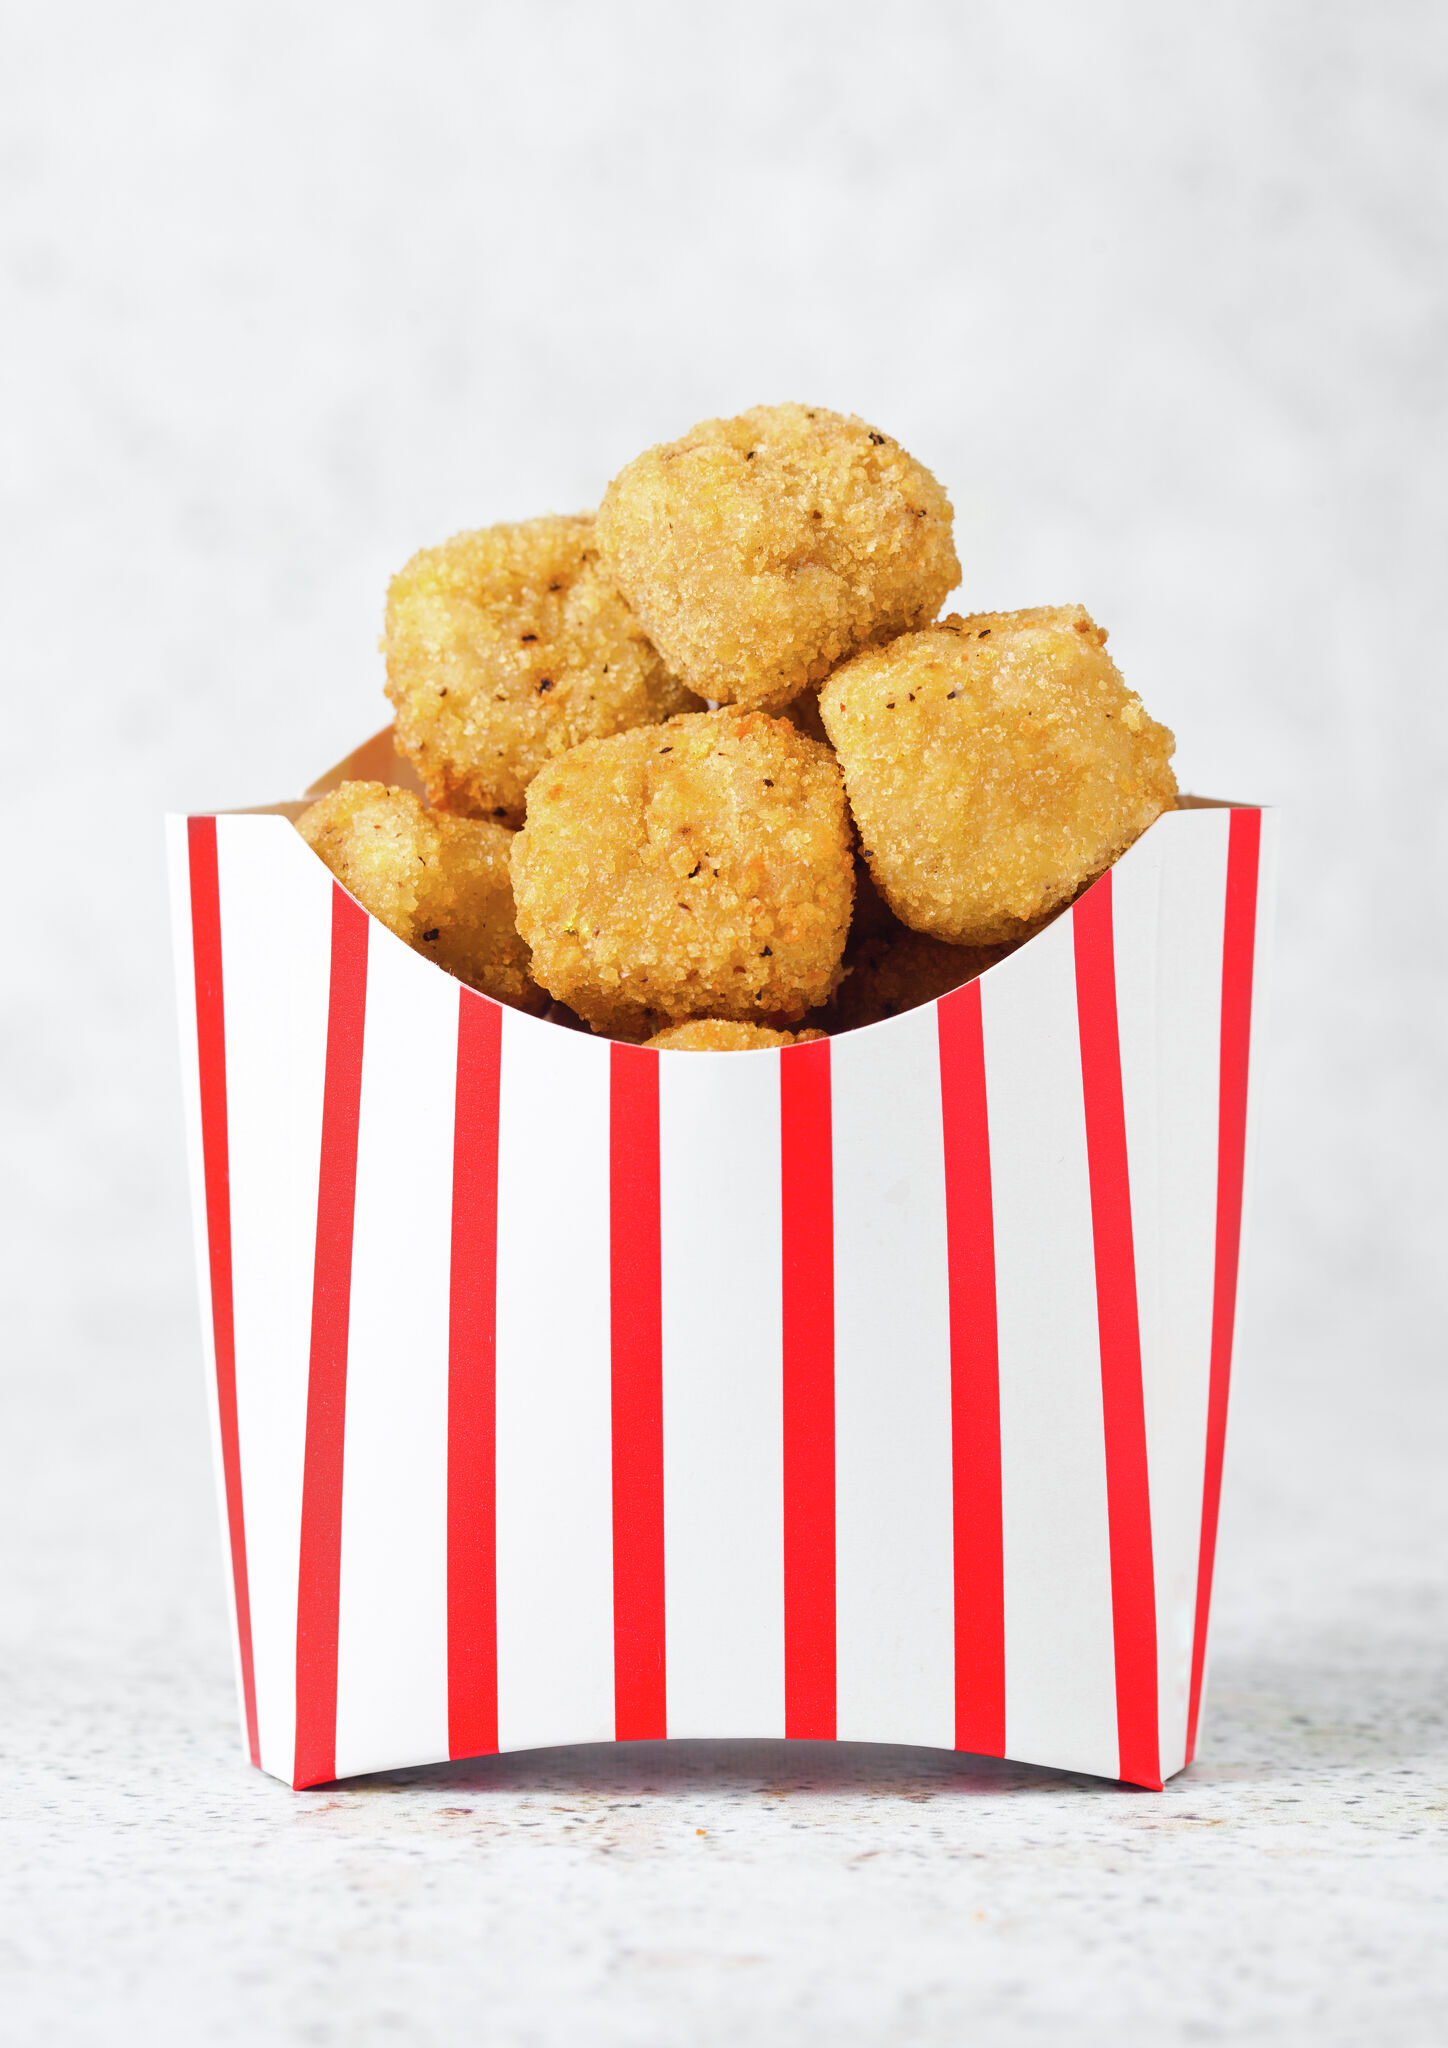 KFC simplifying menu by eliminating popcorn chicken, wings and more